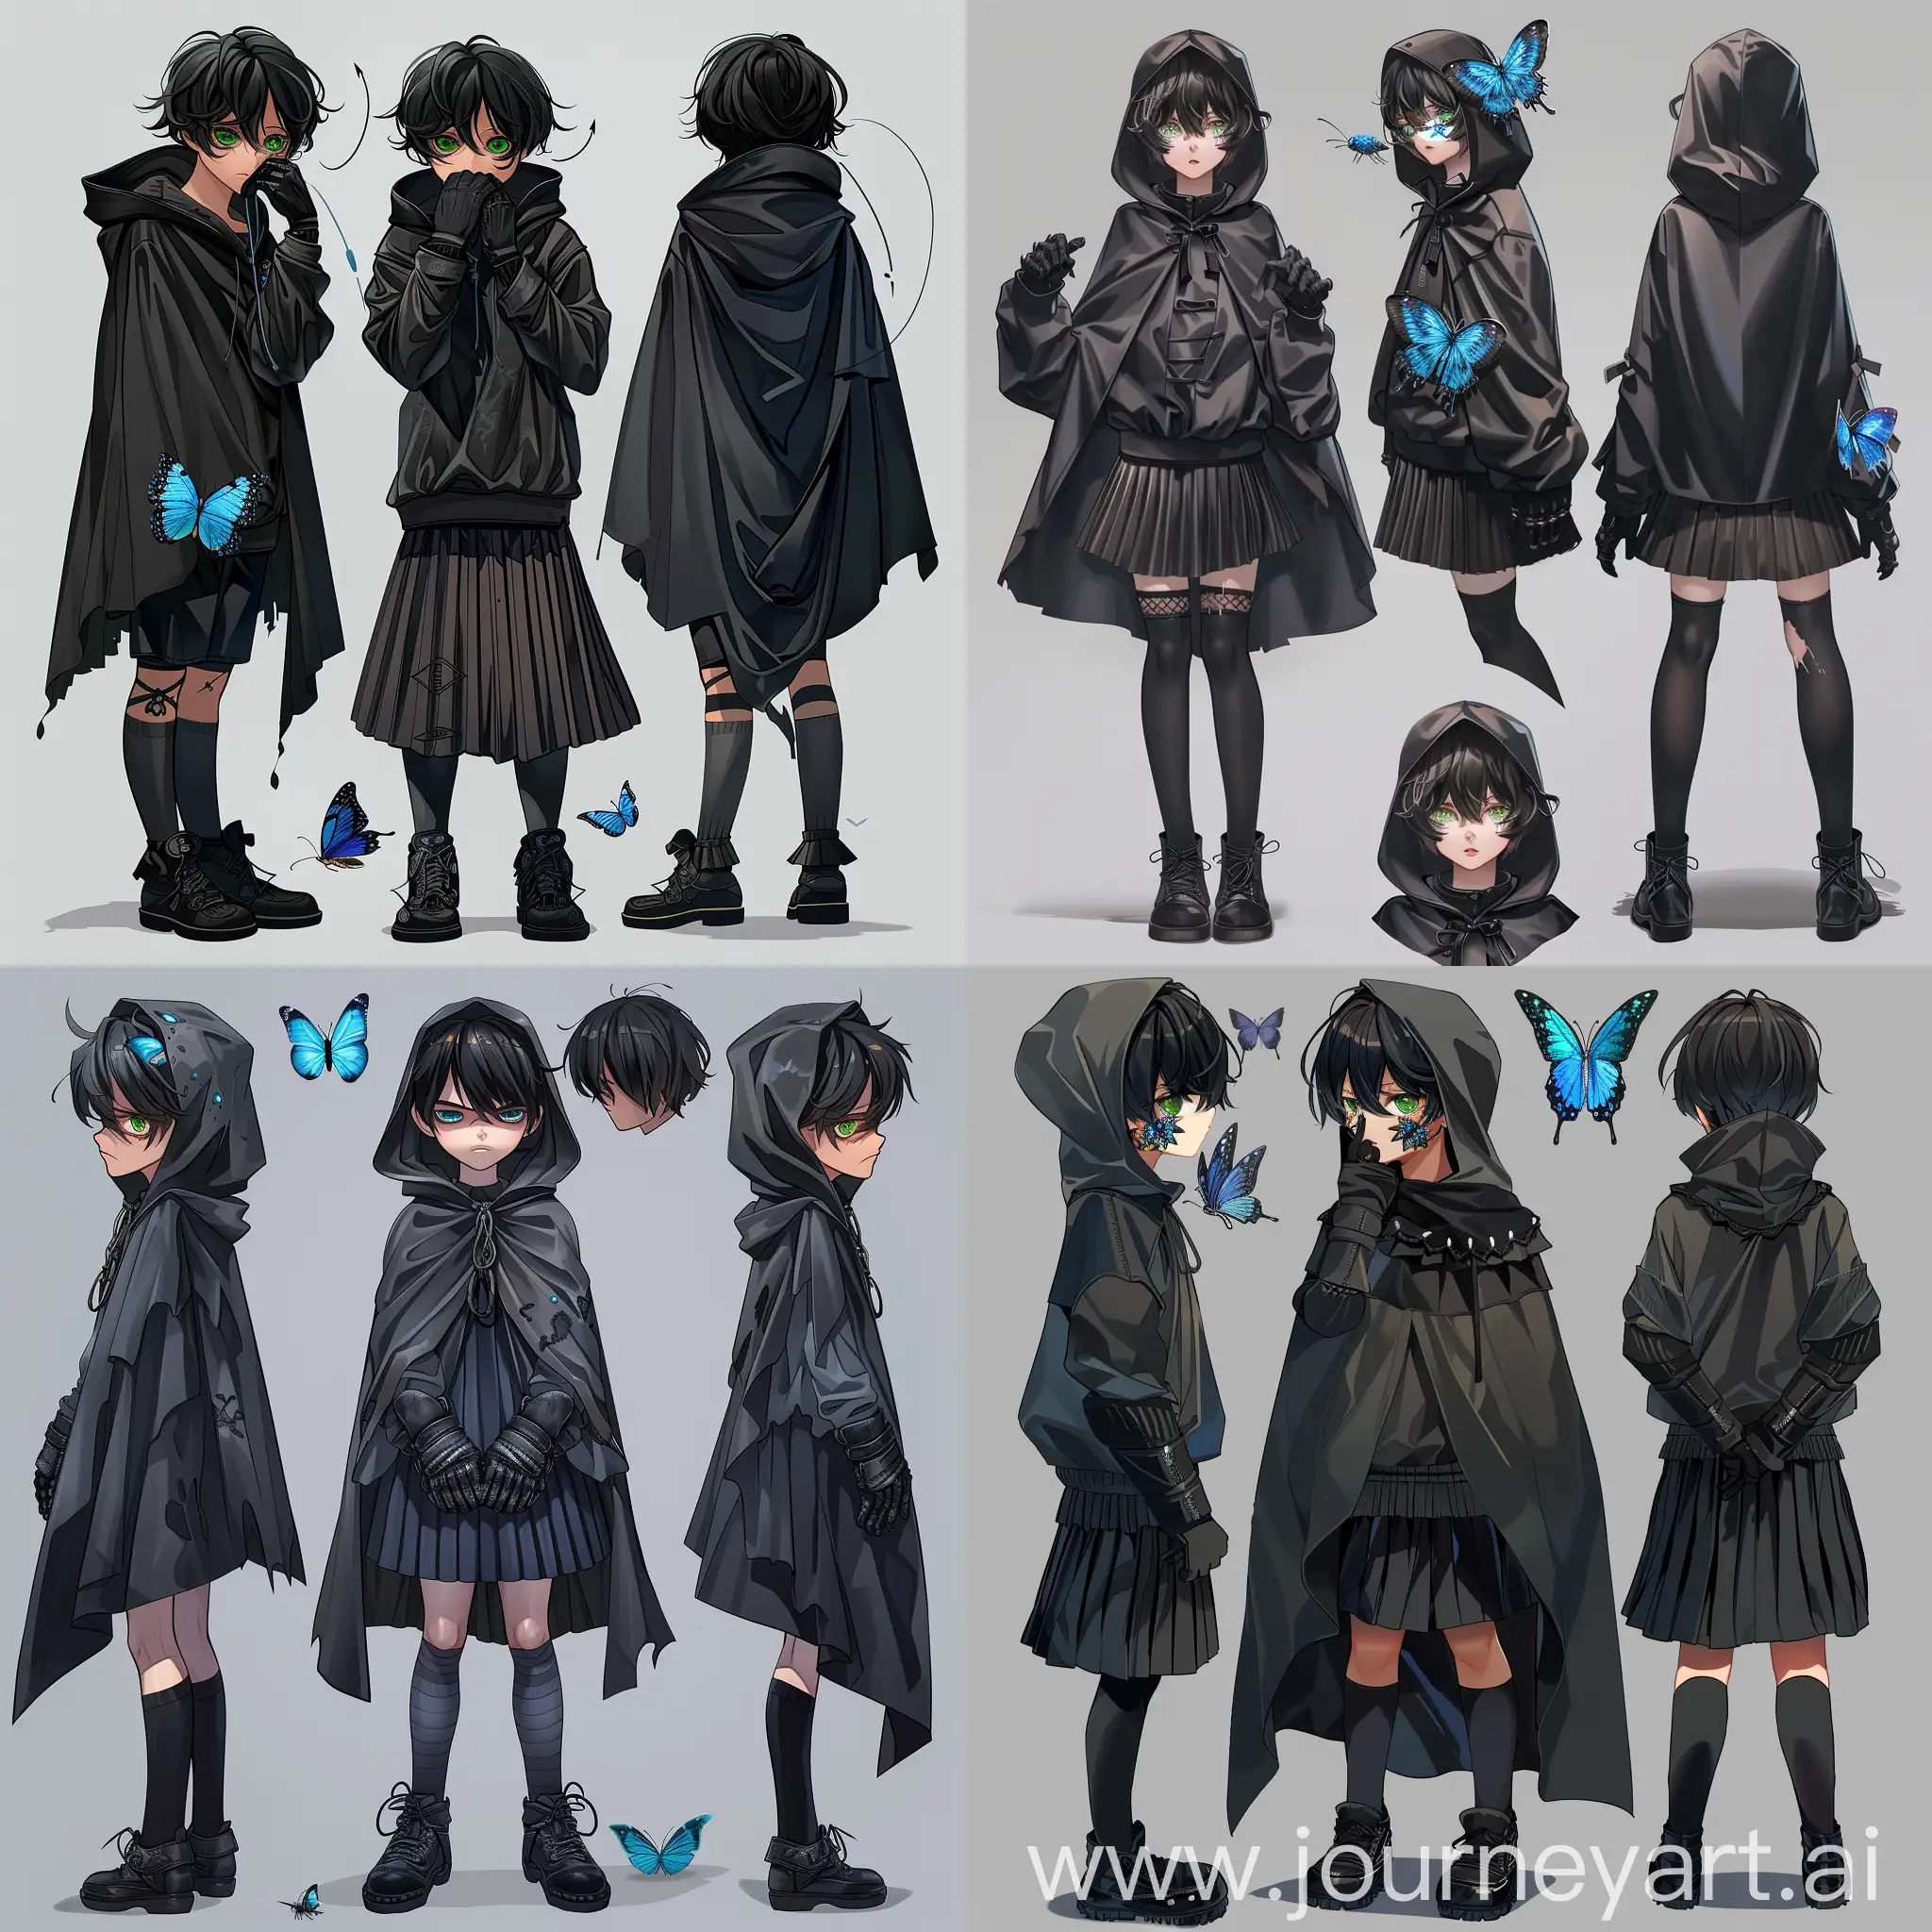 Mysterious-Hooded-Figure-with-Blue-Butterfly-Enigmatic-Male-Character-in-Cloak-and-Boots